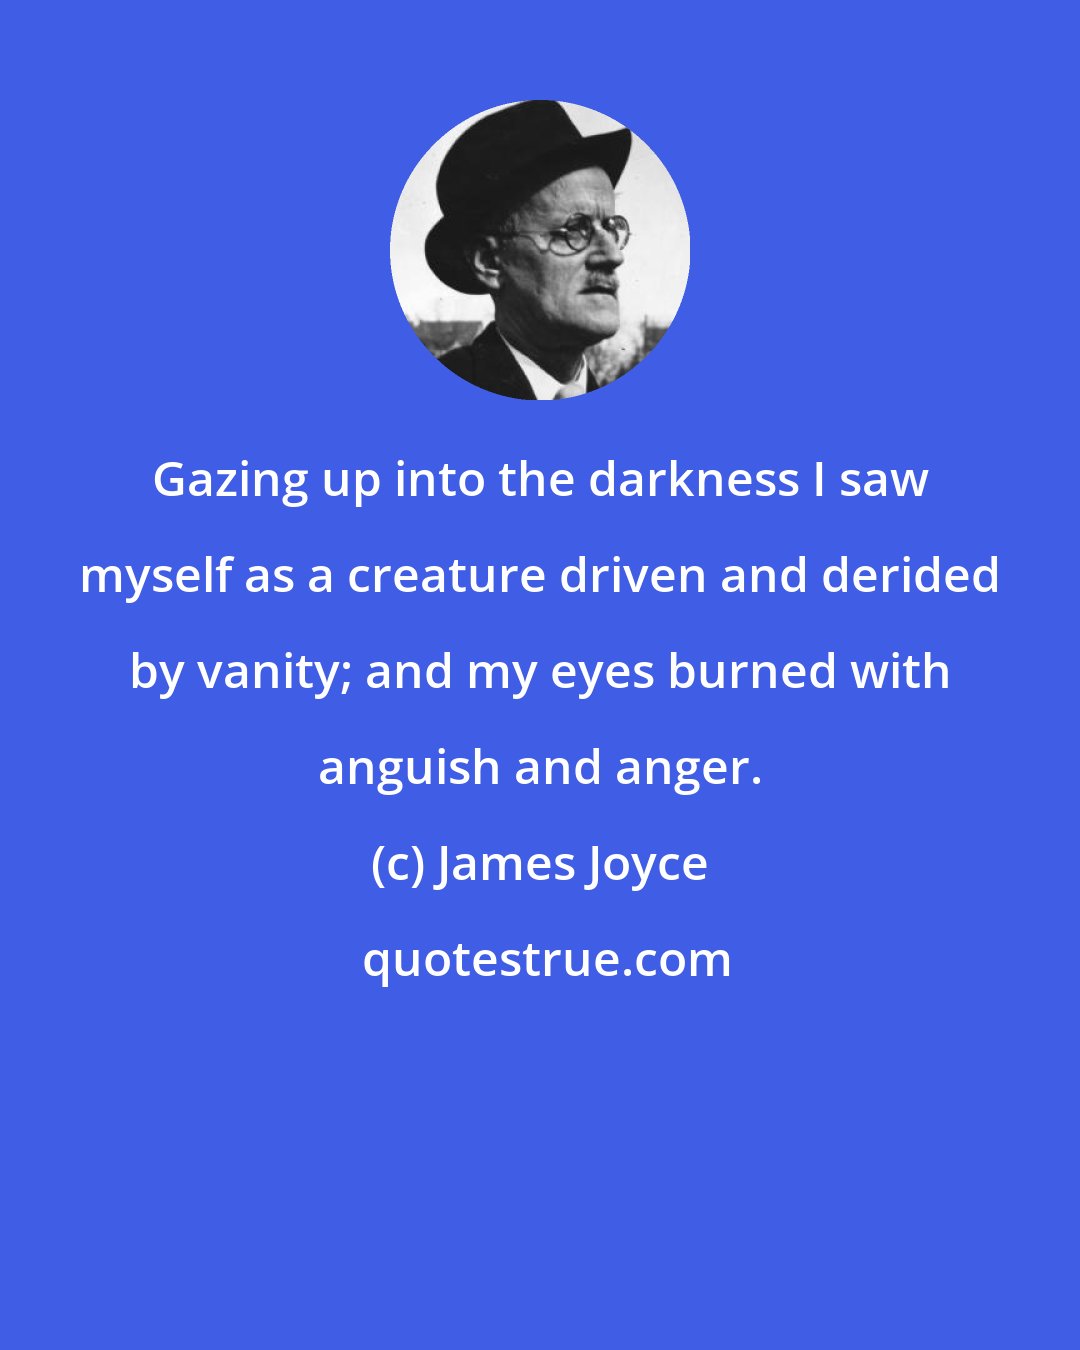 James Joyce: Gazing up into the darkness I saw myself as a creature driven and derided by vanity; and my eyes burned with anguish and anger.